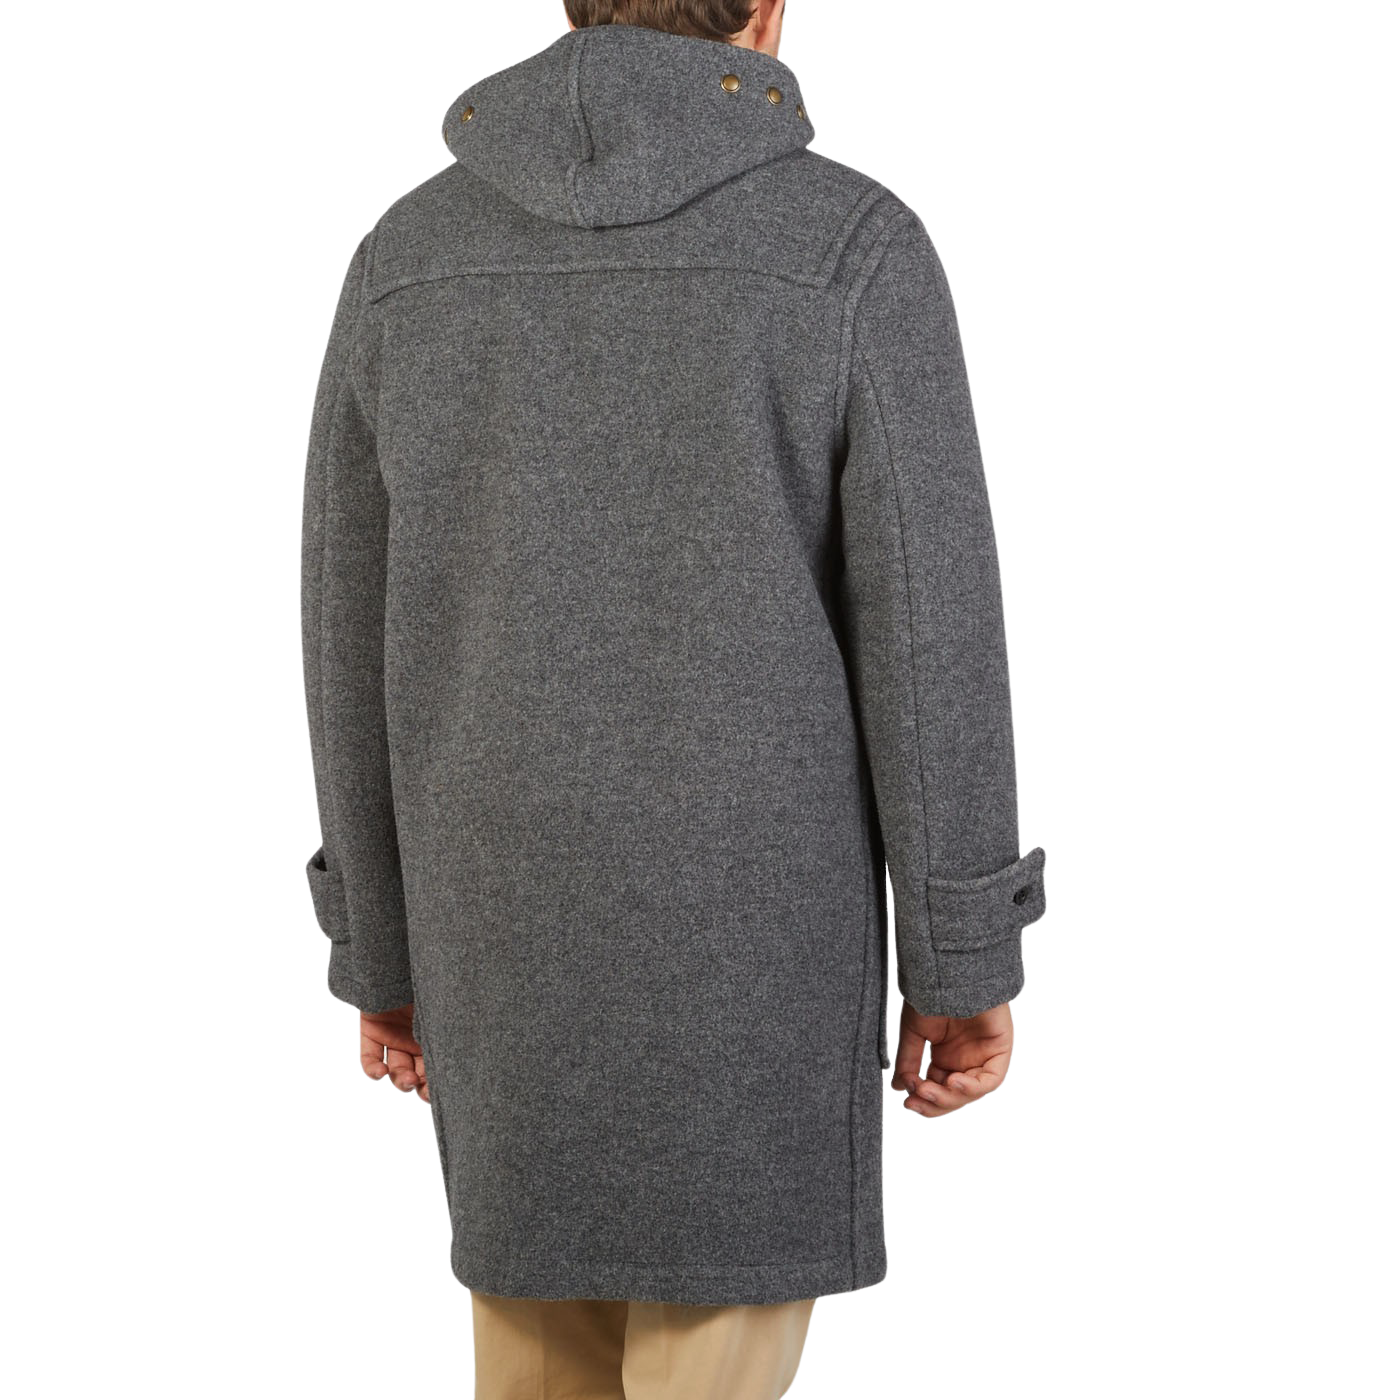 The back view of a man in a Gloverall Grey Melange Wool Monty Duffle Coat.